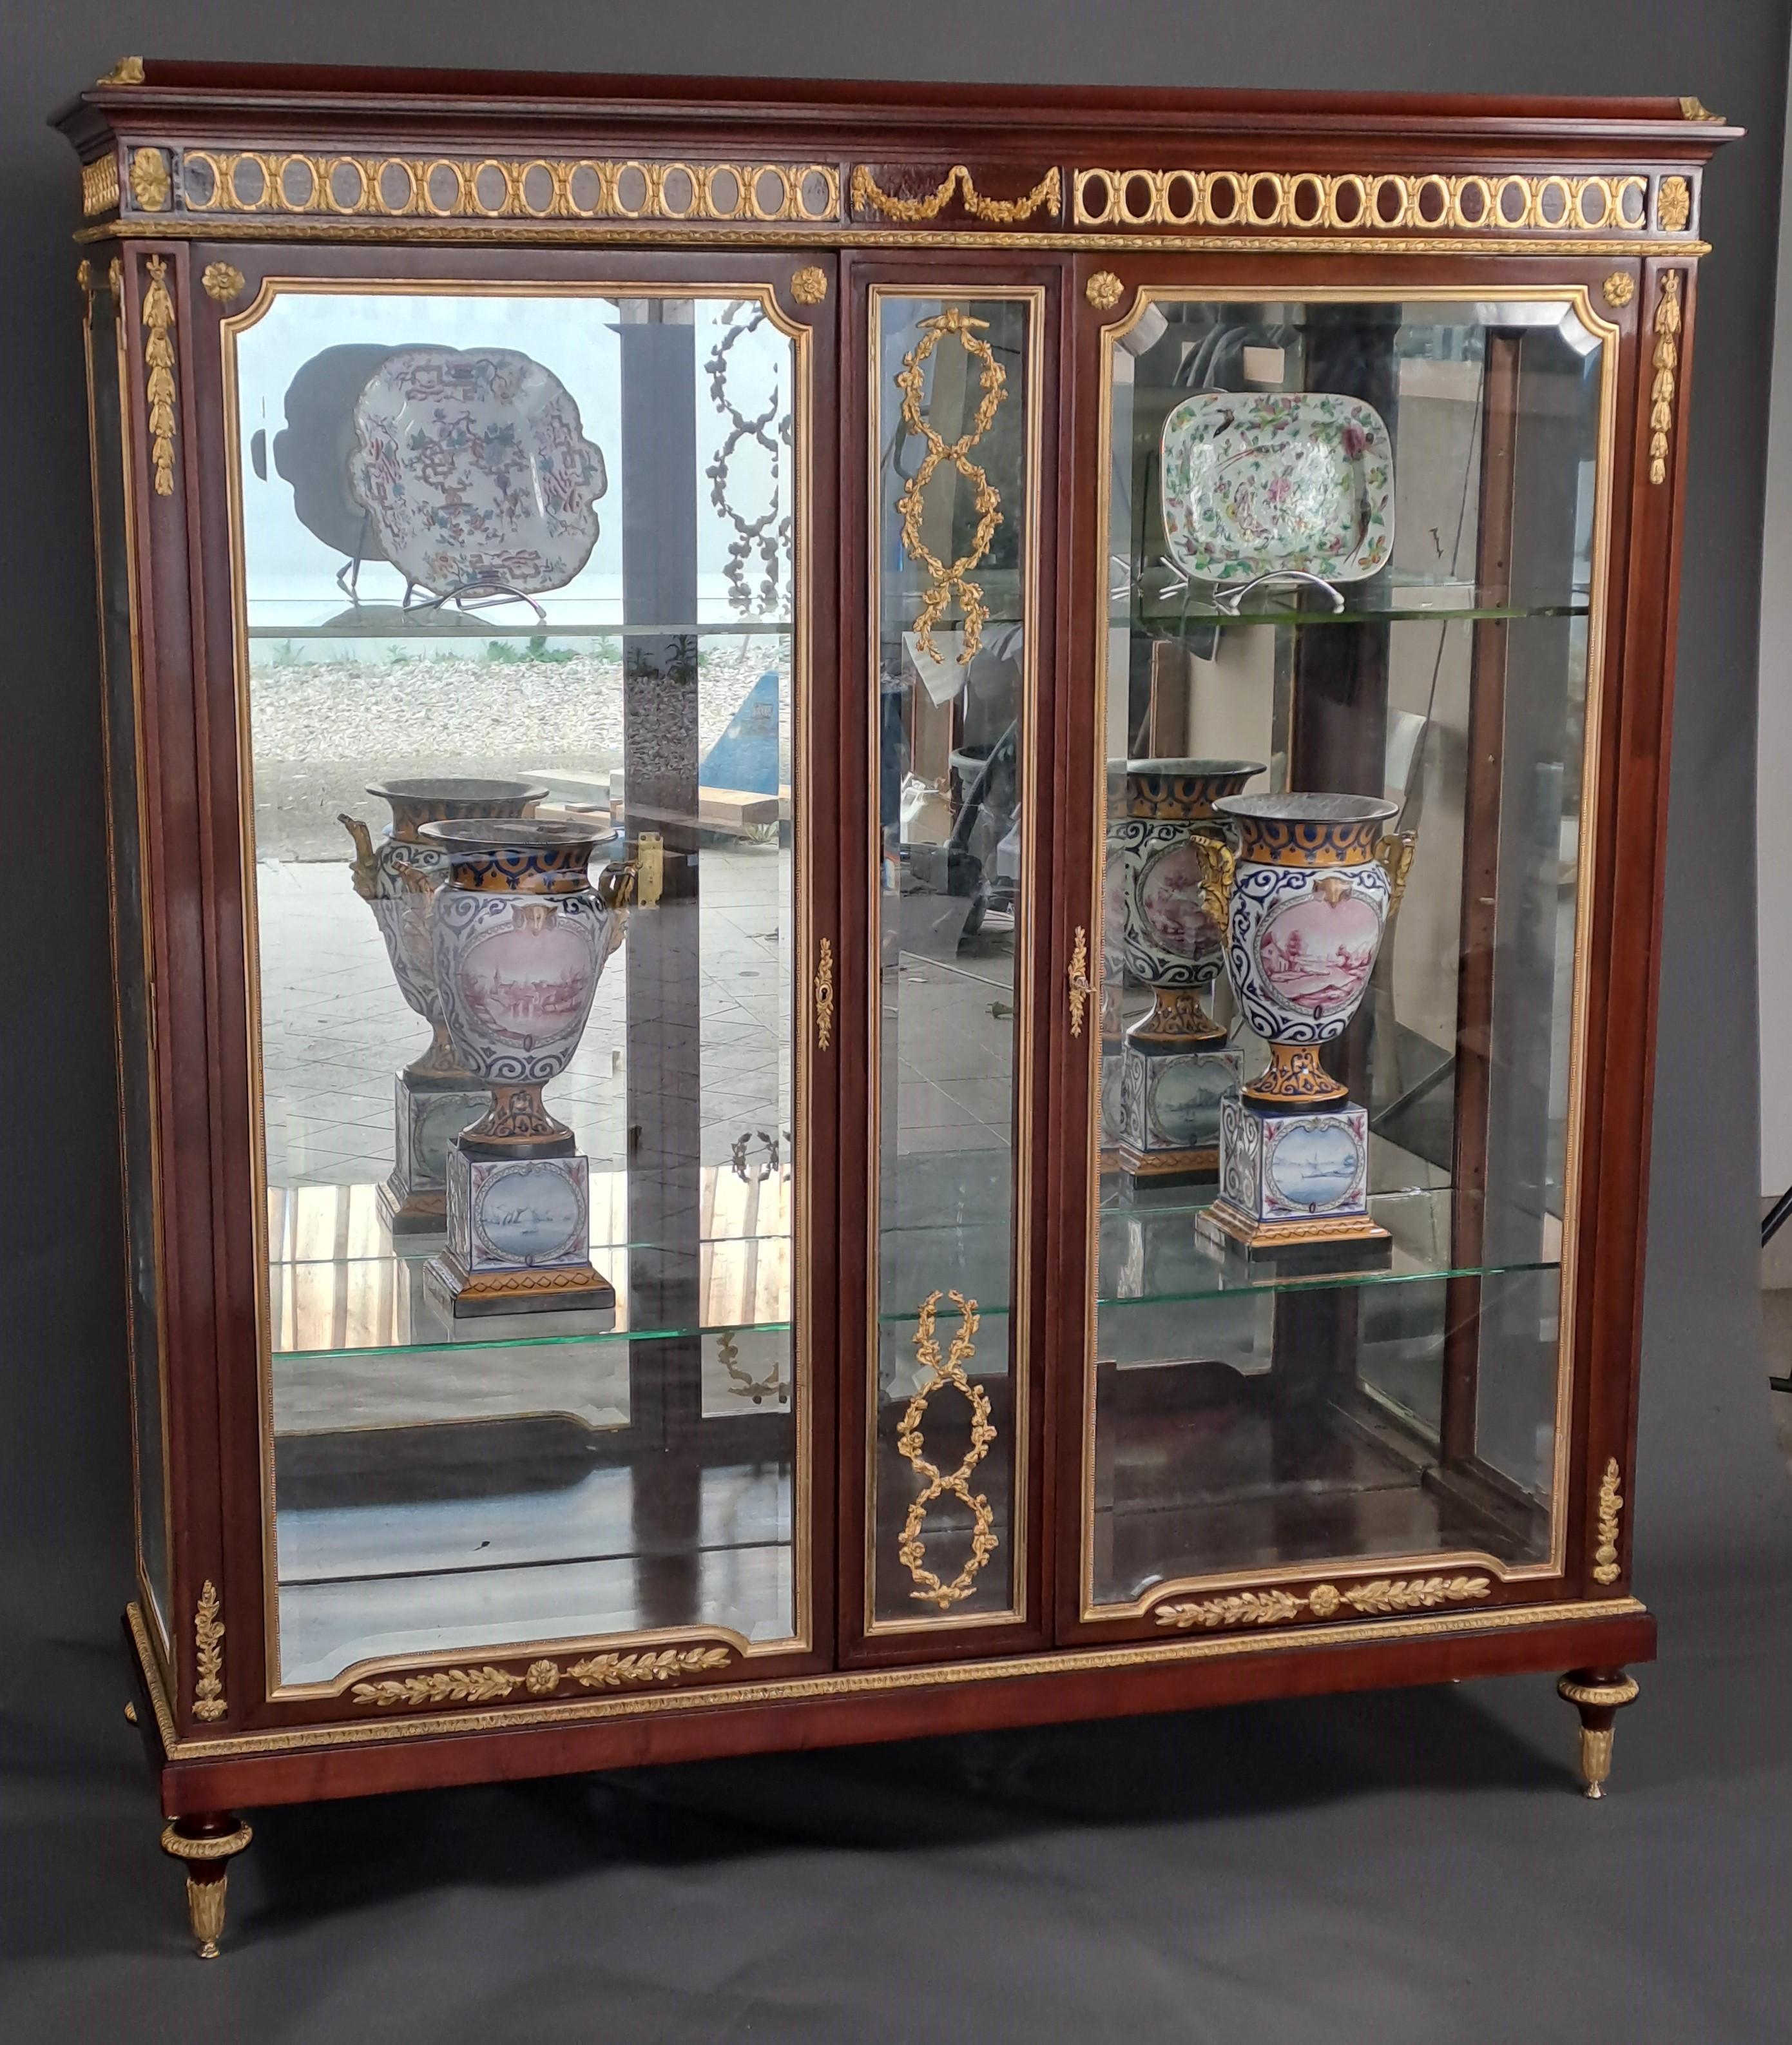 Magnificent Louis XVI style showcase in mahogany veneer with rich, very finely chiseled gilded bronze ornamentation.

Opening two large doors on the front separated by a glass frame.

Beveled windows on the front as well as on the sides.

Mirror